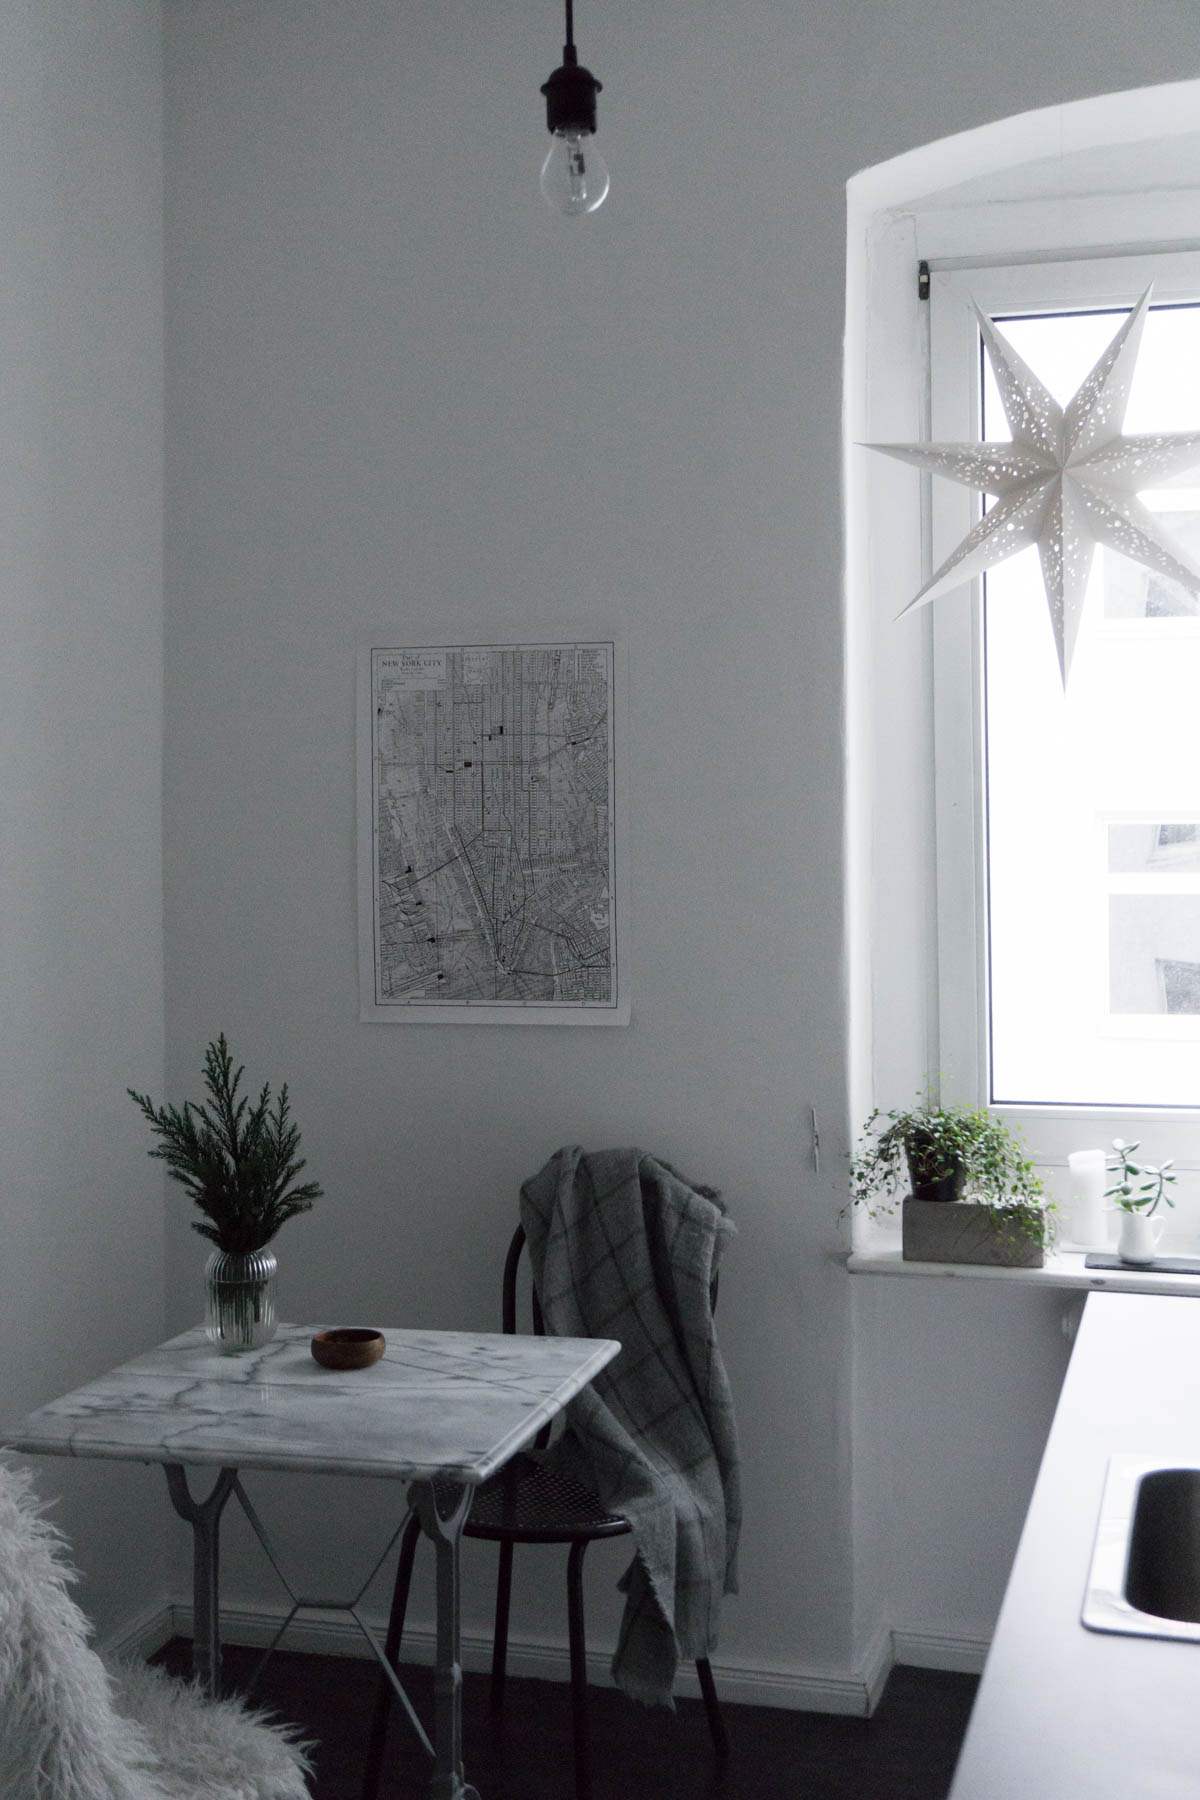 Cozy Winter Kitchen, Scandinavian Christmas Decor, Star Lantern and Marble Table - RG Daily Blog